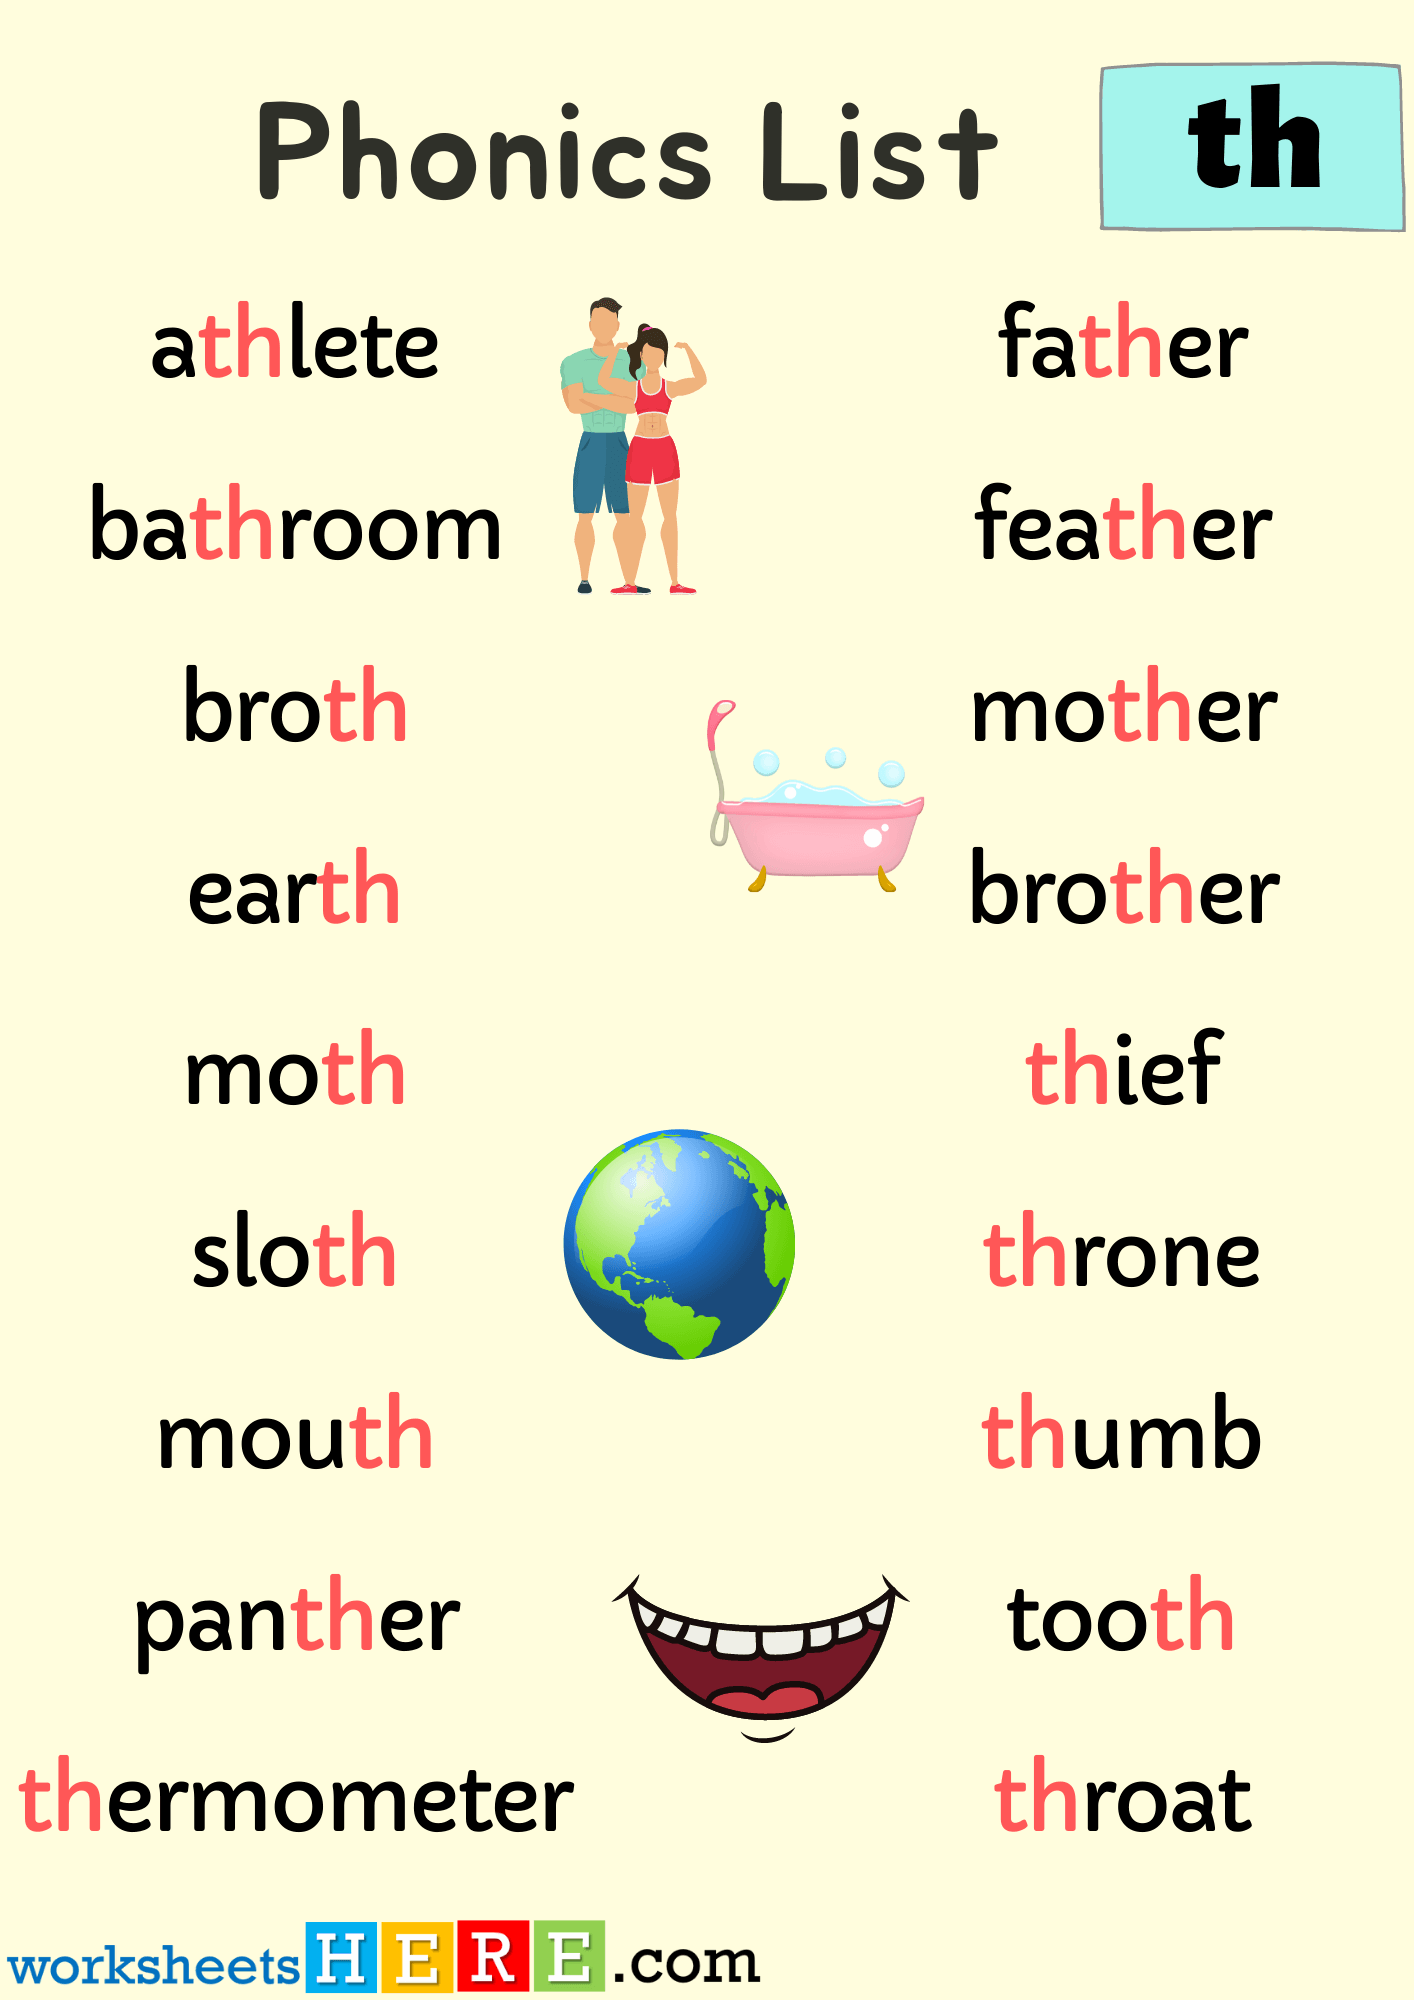 Spelling Phonics ‘th’ Sounds PDF Worksheet For Kids and Students